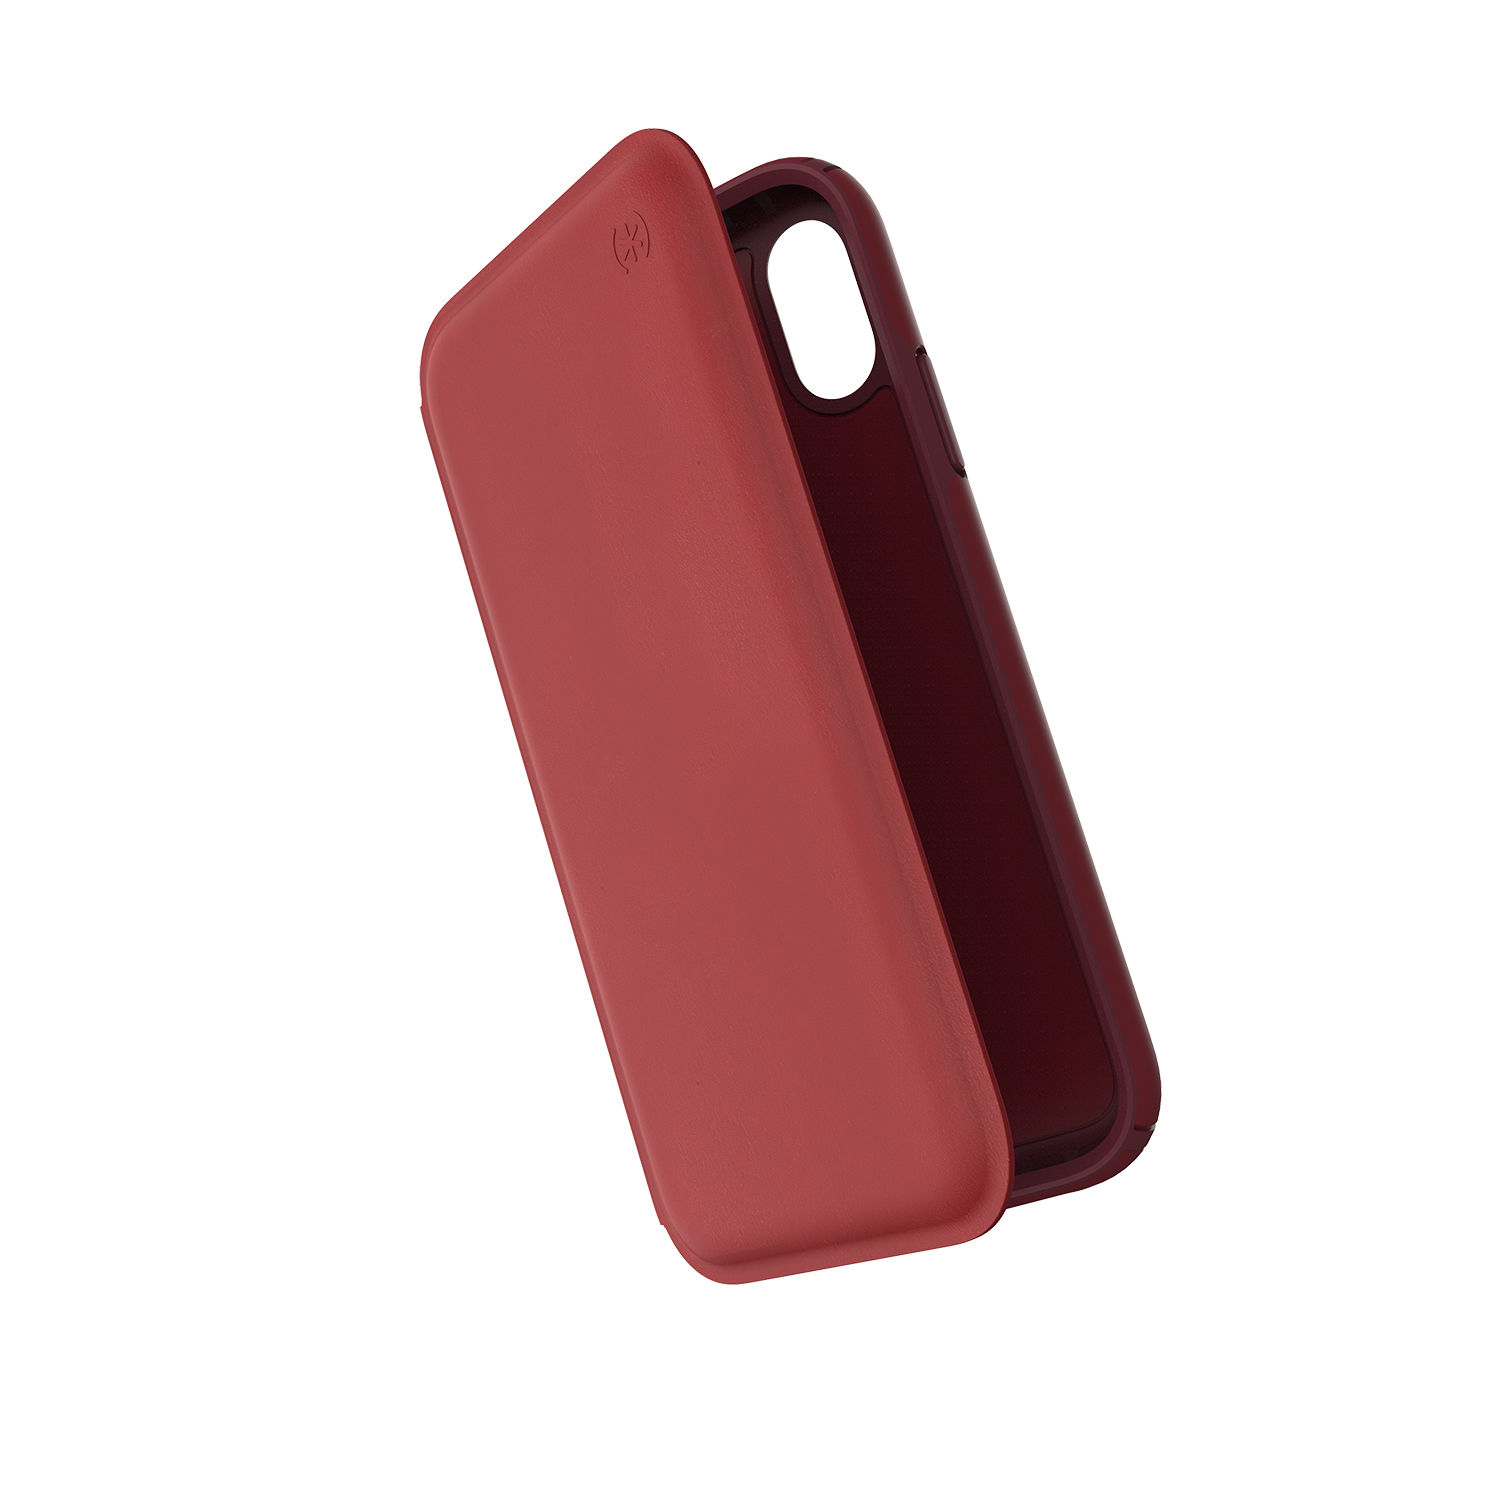 Speck Presidio Folio Leather Case Rouge Red/Garnet Red/Currant Jam Red for iPhone XR